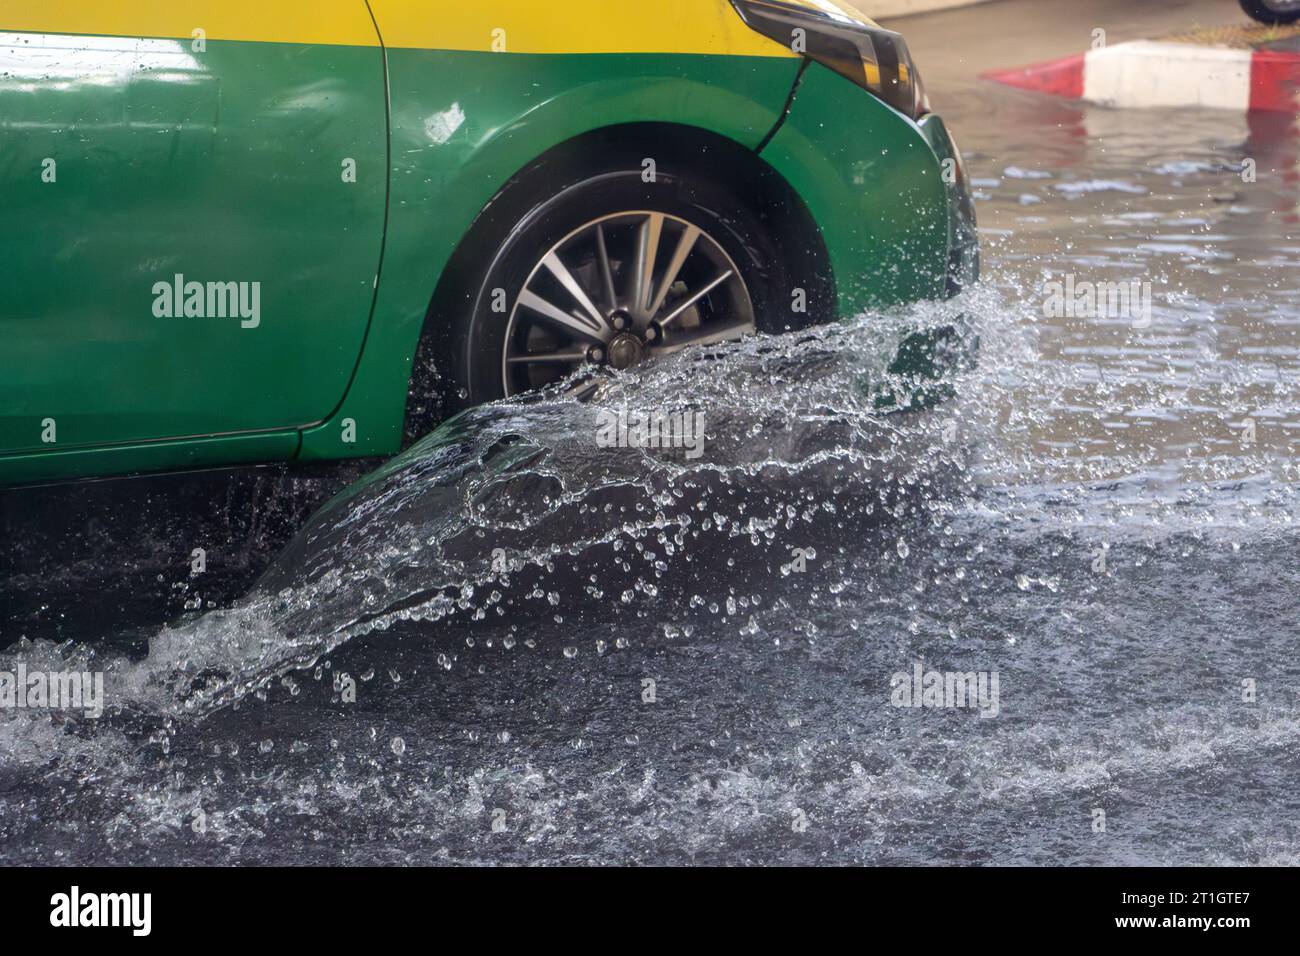 The detailed look at wheel of car driving through a flooding street the rain Stock Photo